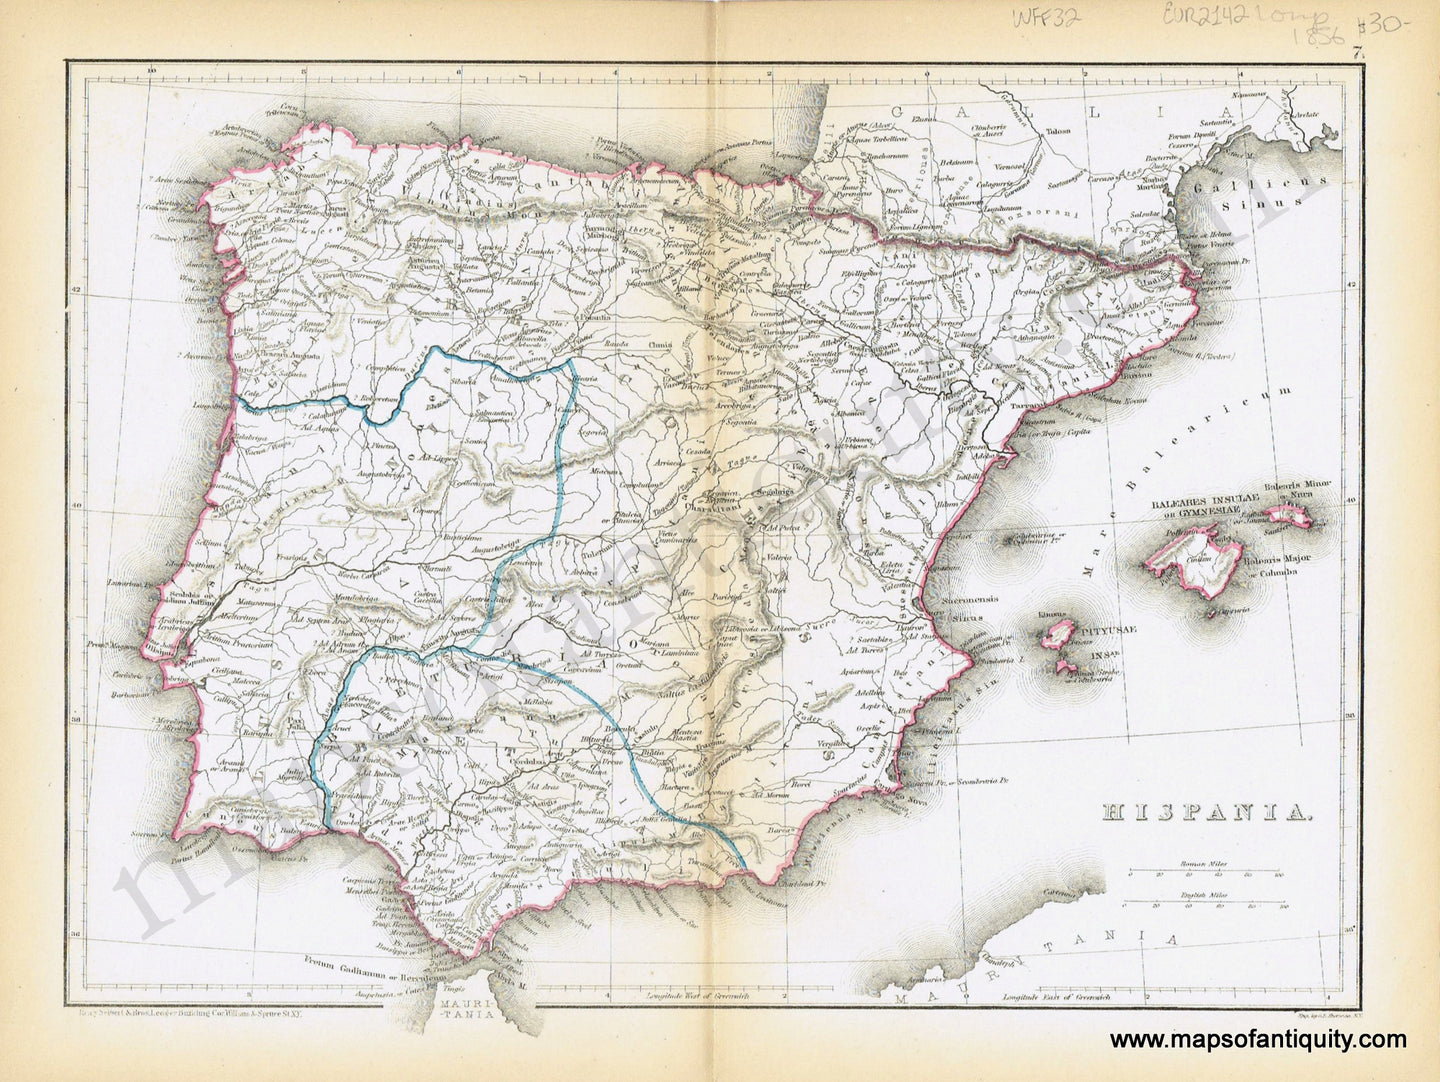 Antique-Hand-Colored-Map-Hispania.-Europe-Spain-&-Portugal-1856-Long-Maps-Of-Antiquity